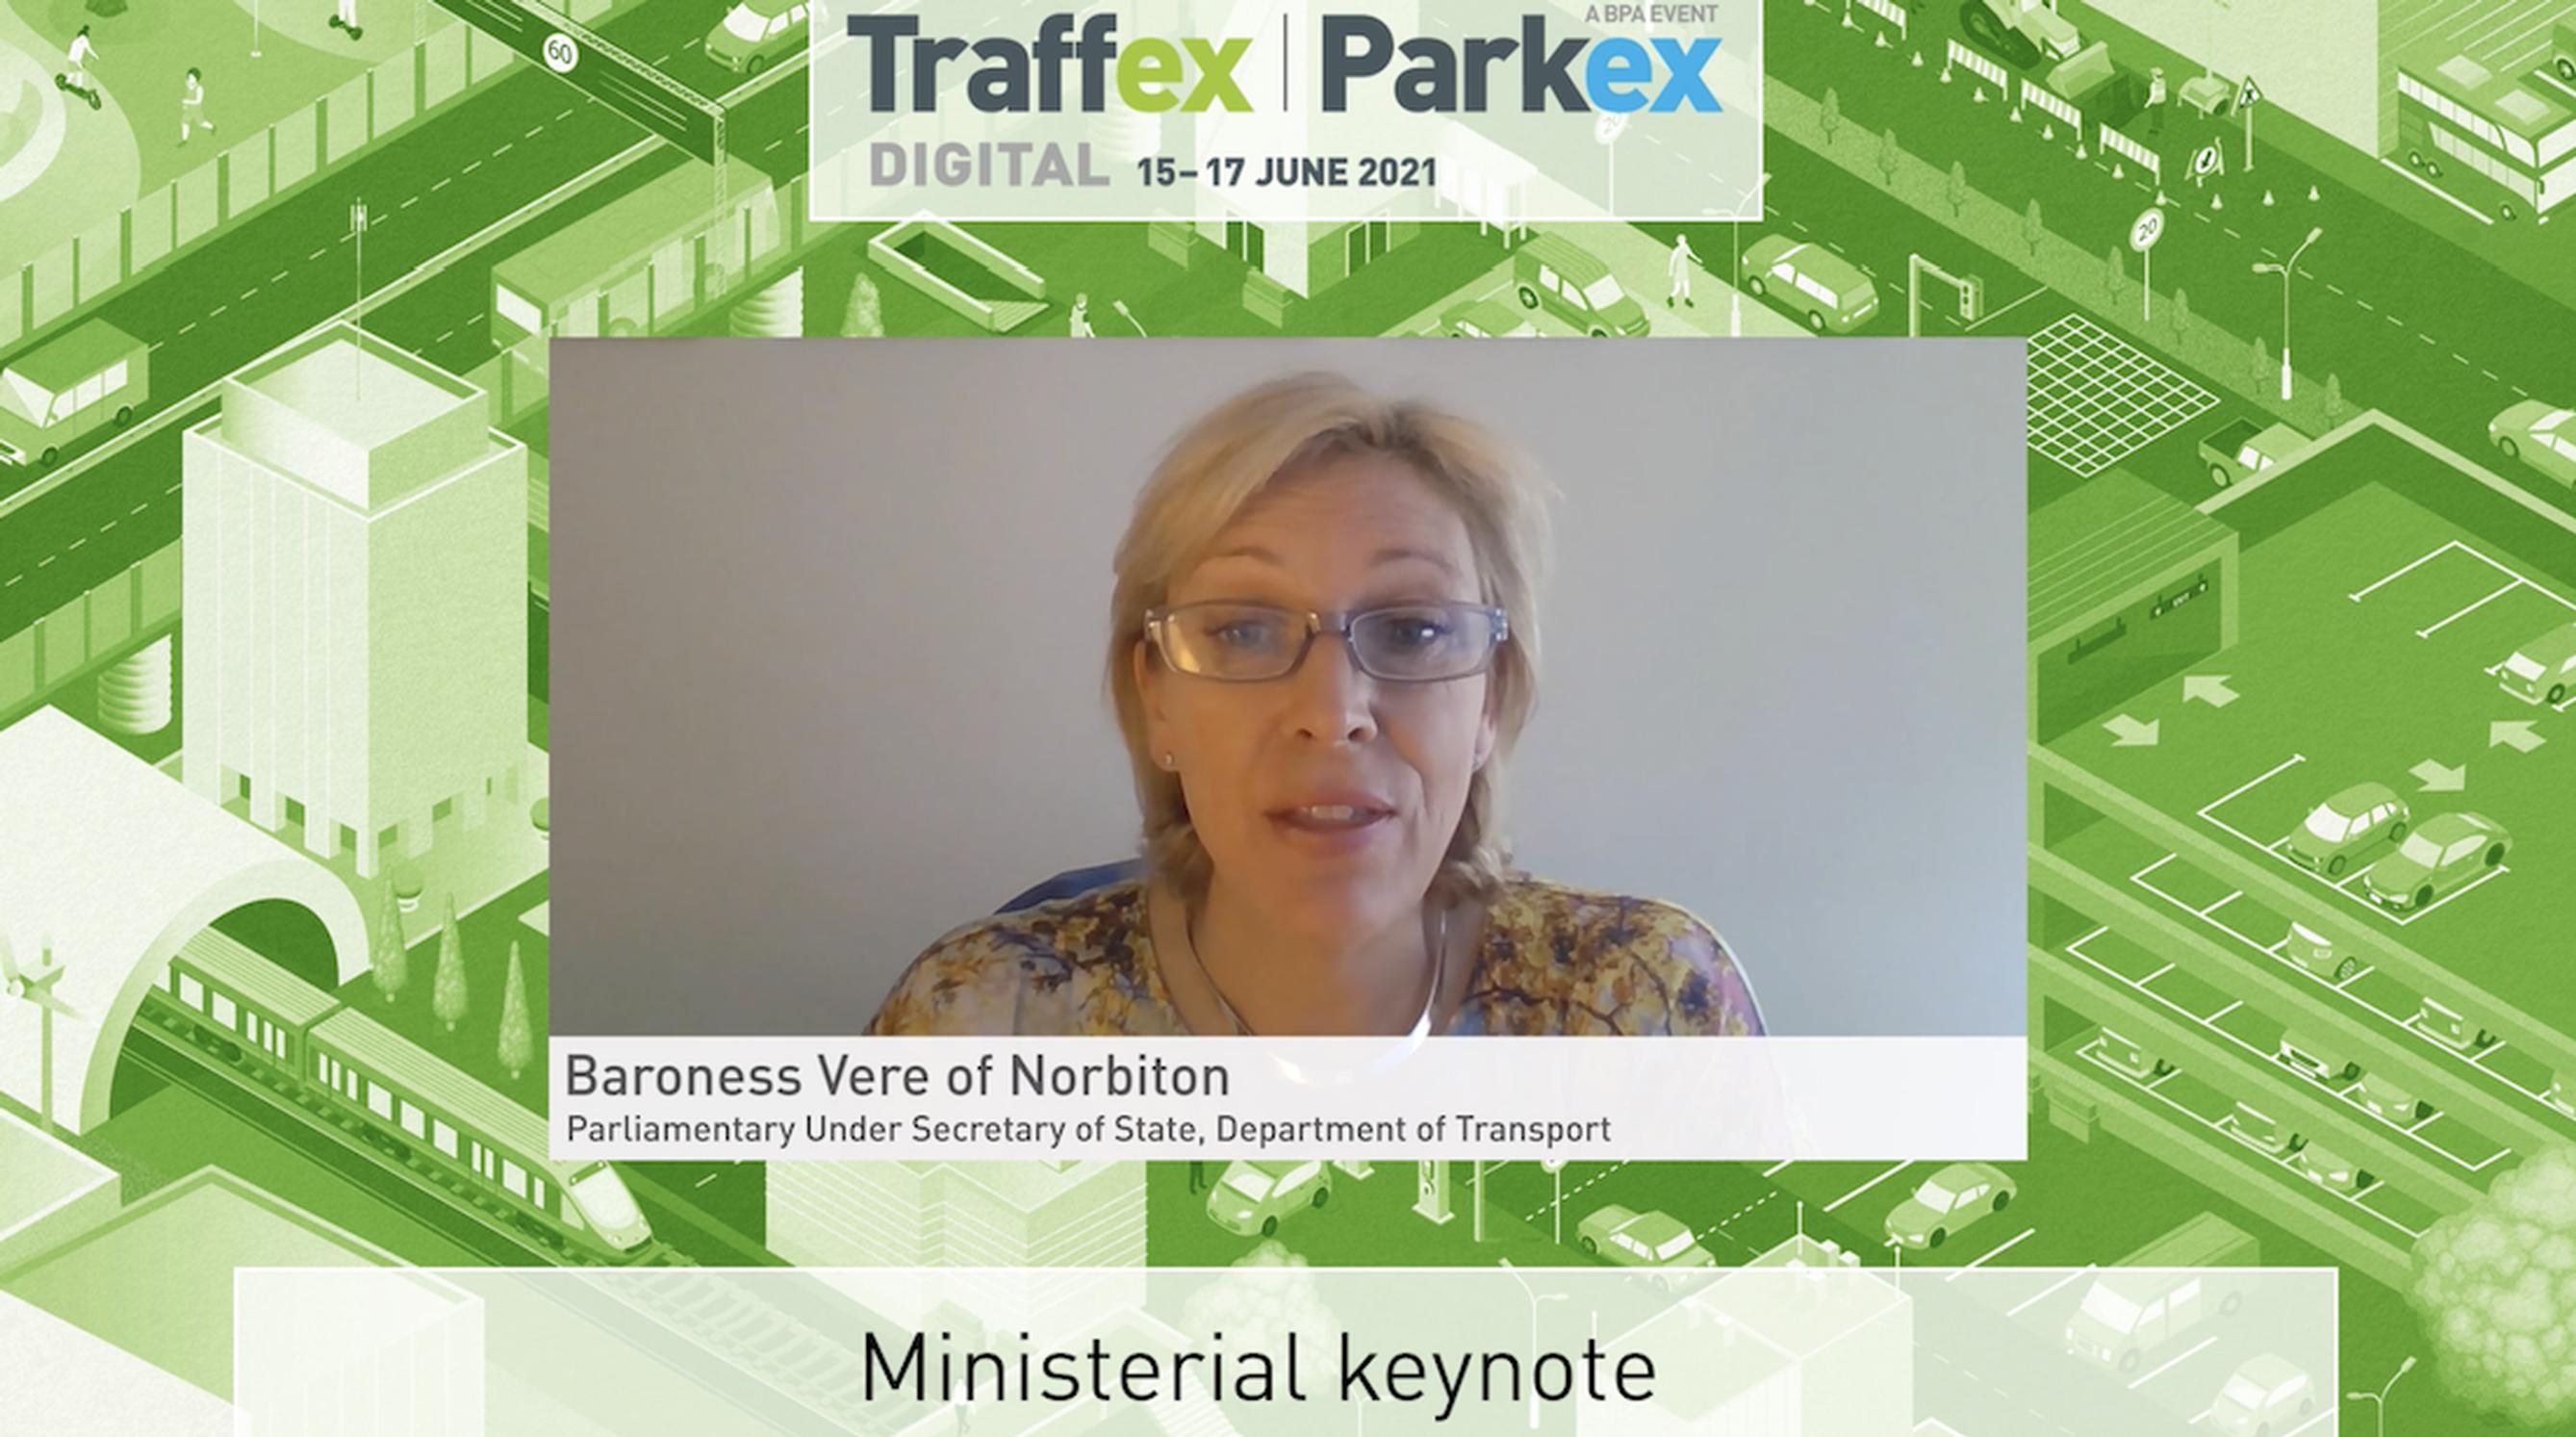 Baroness Vere addressed the virtual Parkex and Traffex event